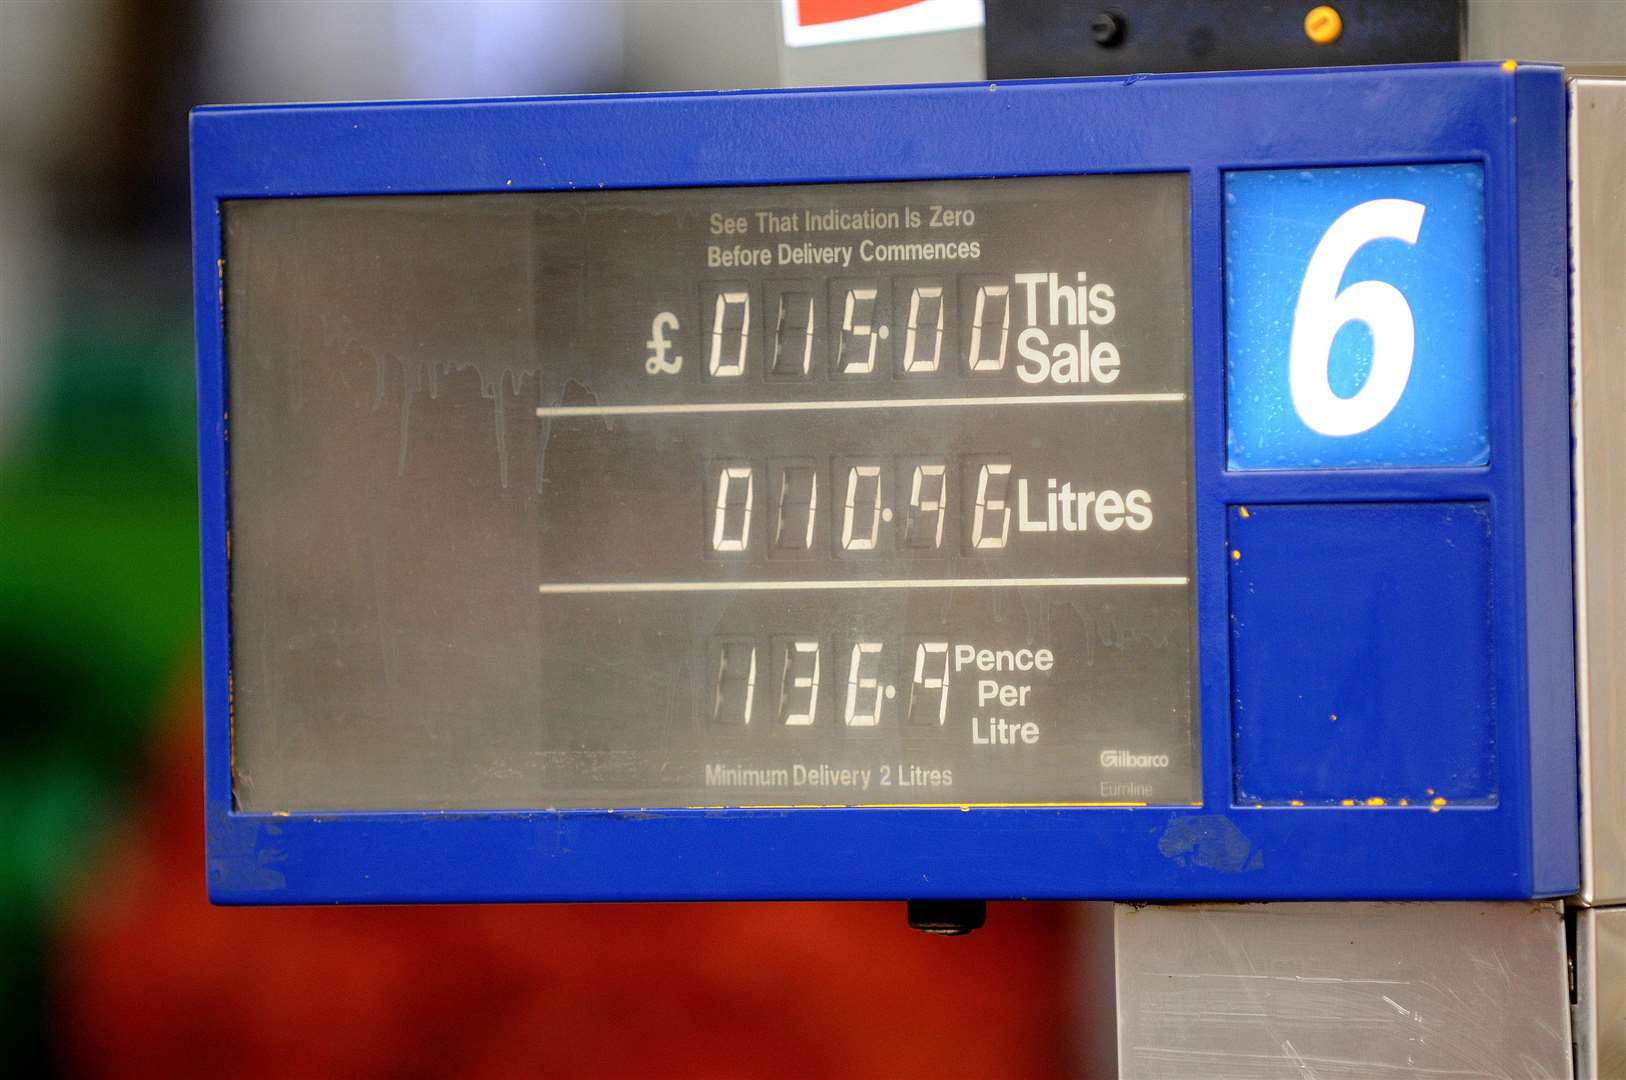 FairFuel UK has hit out at the latest big price hikes